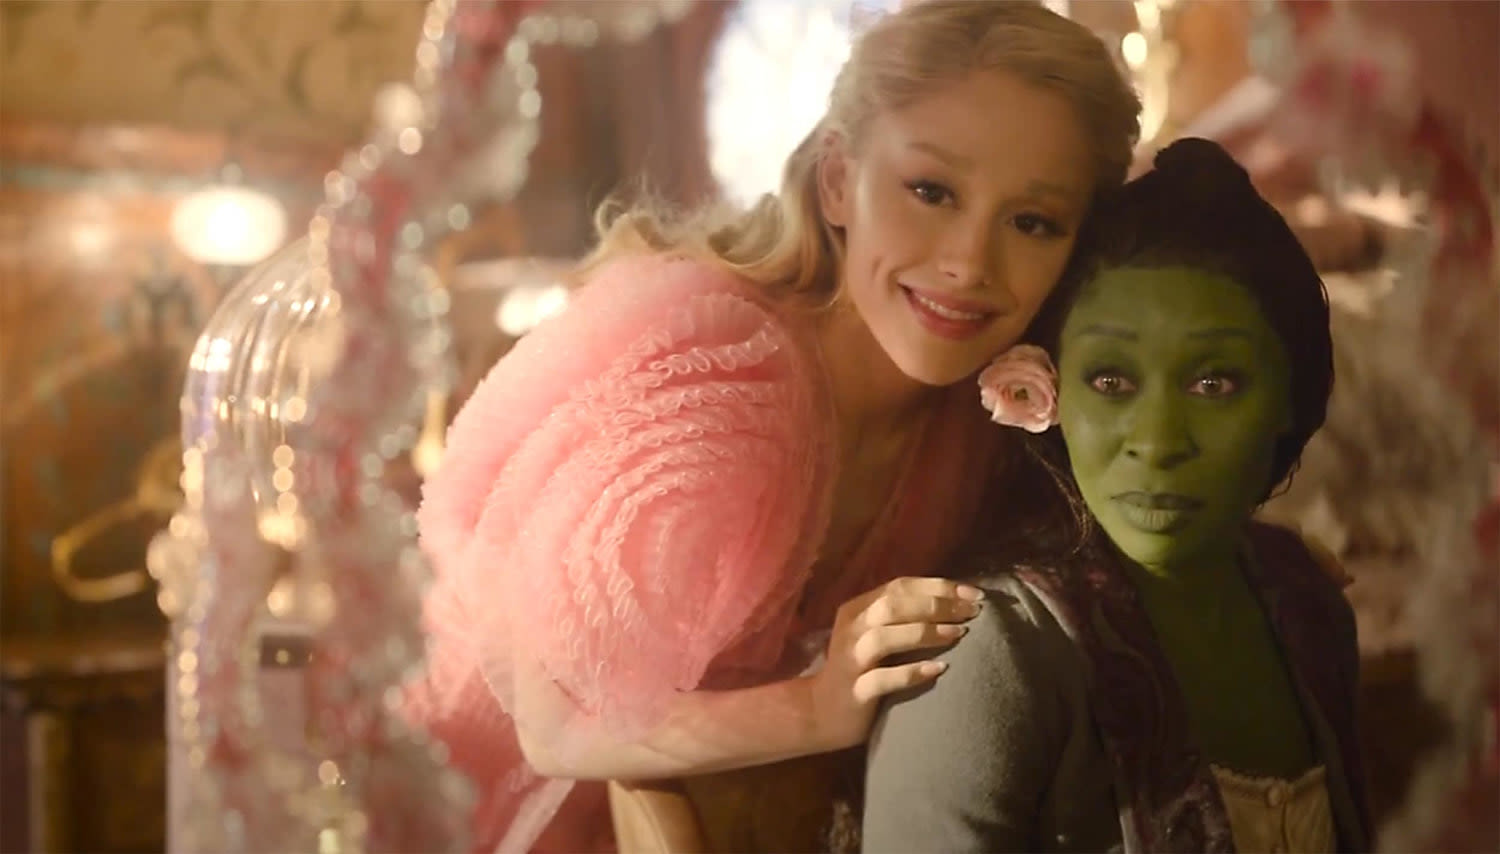 ‘Wicked’ trailer drops: Get a new look at the upcoming movie musical